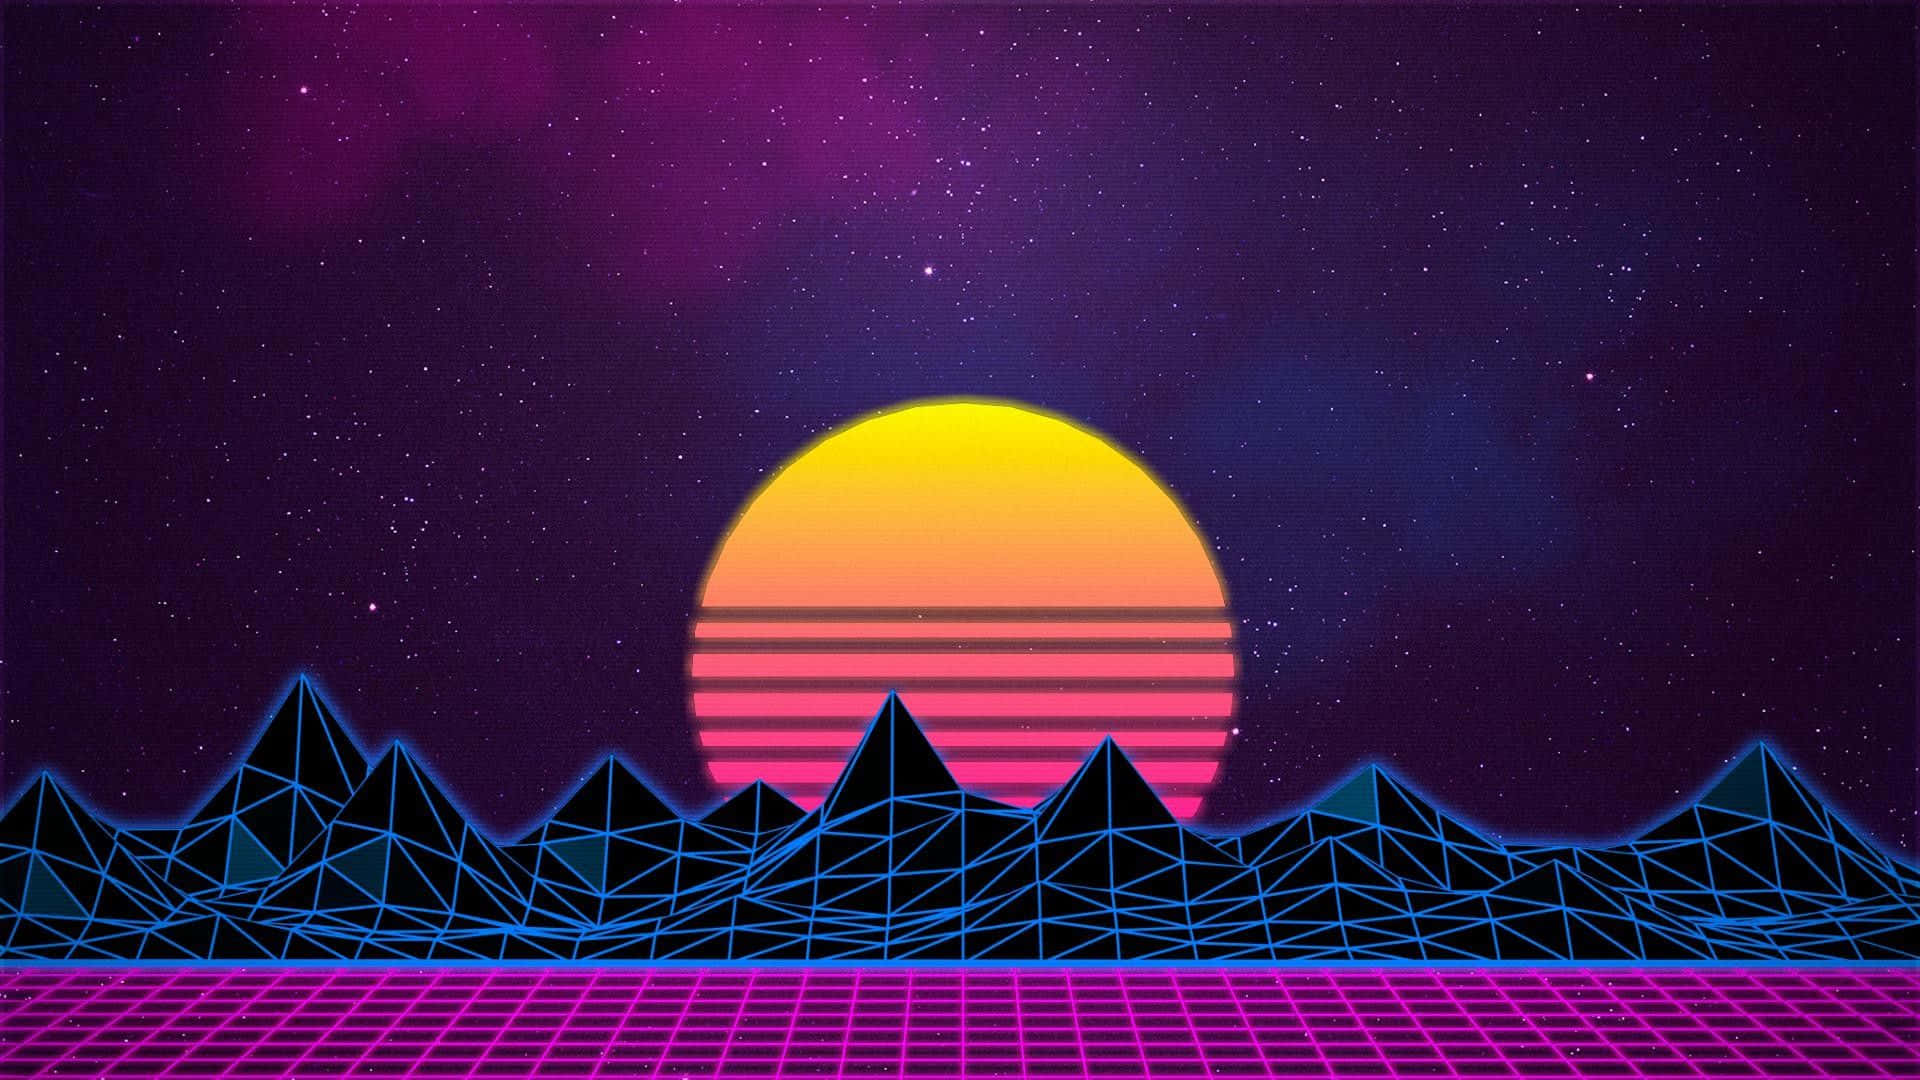 Relive the 80s with this nostalgic retro background!